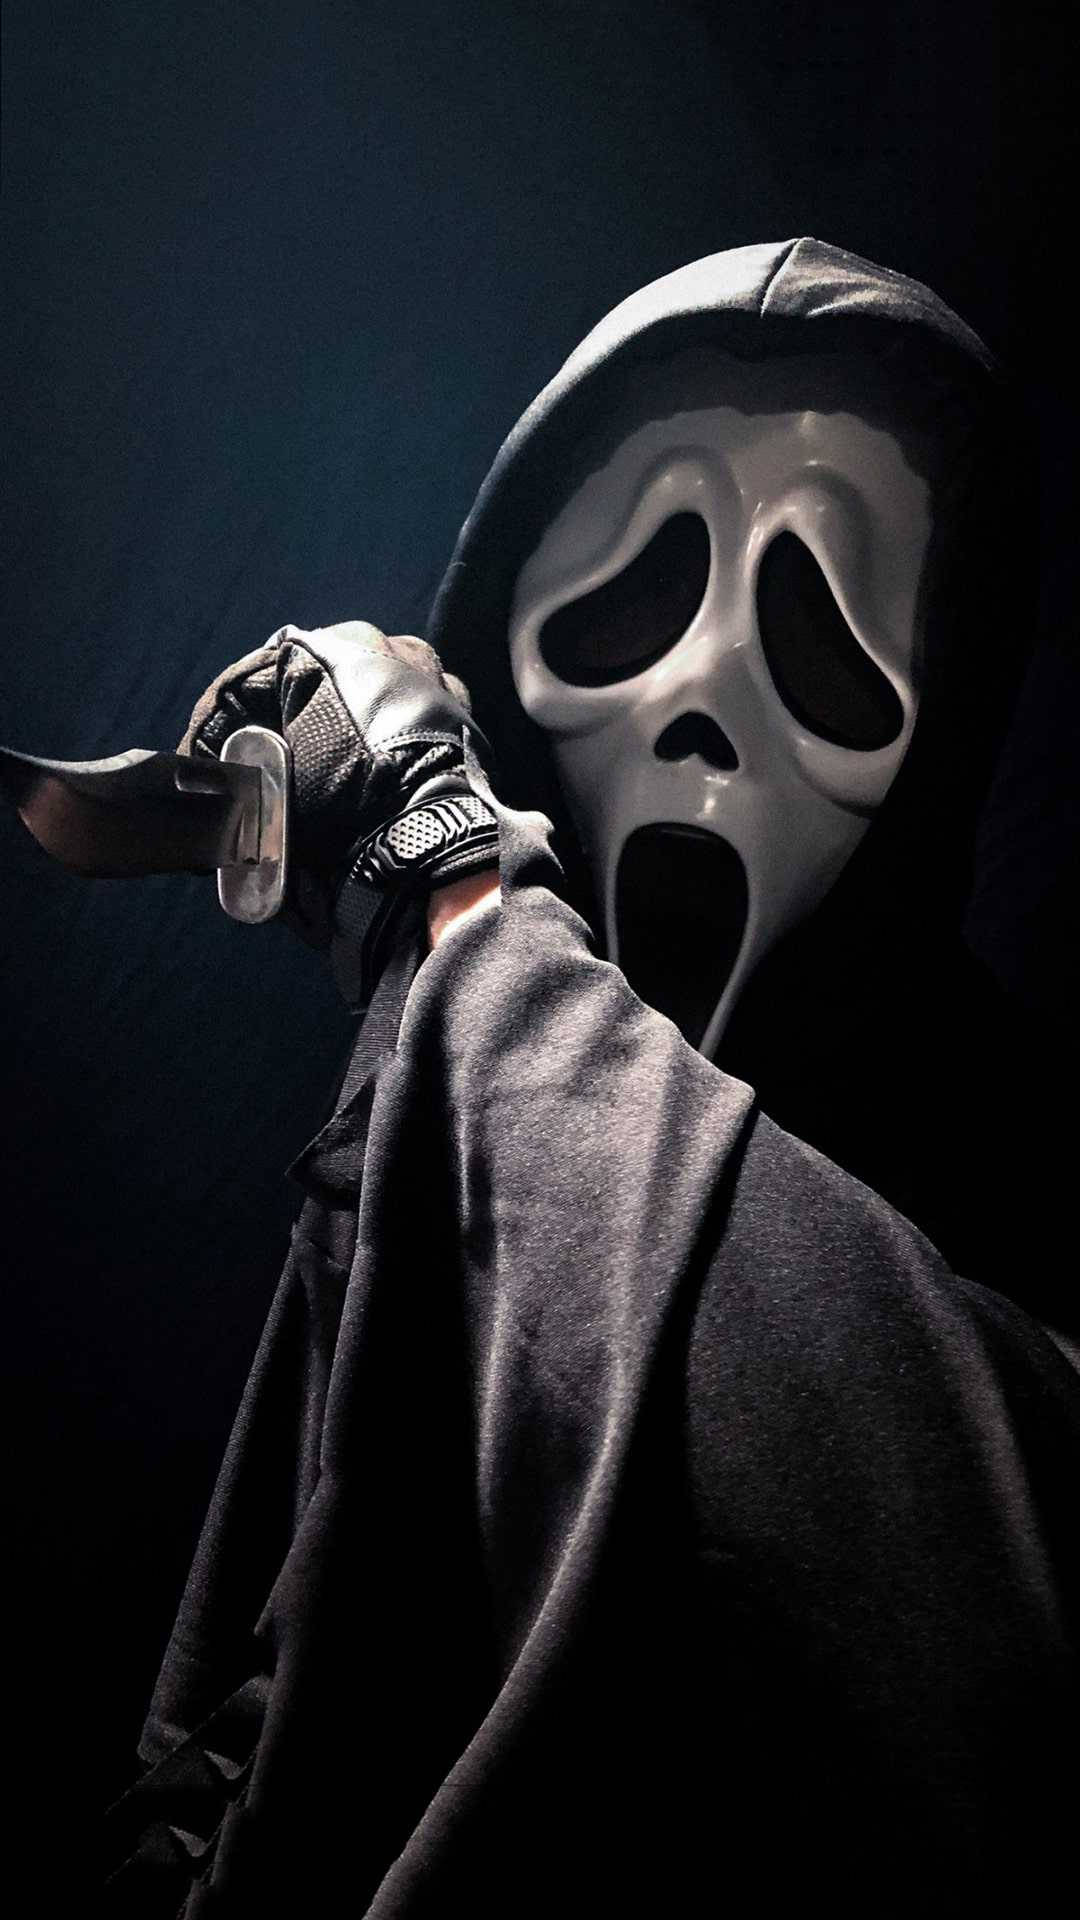 1080X1920 Scream Wallpaper and Background